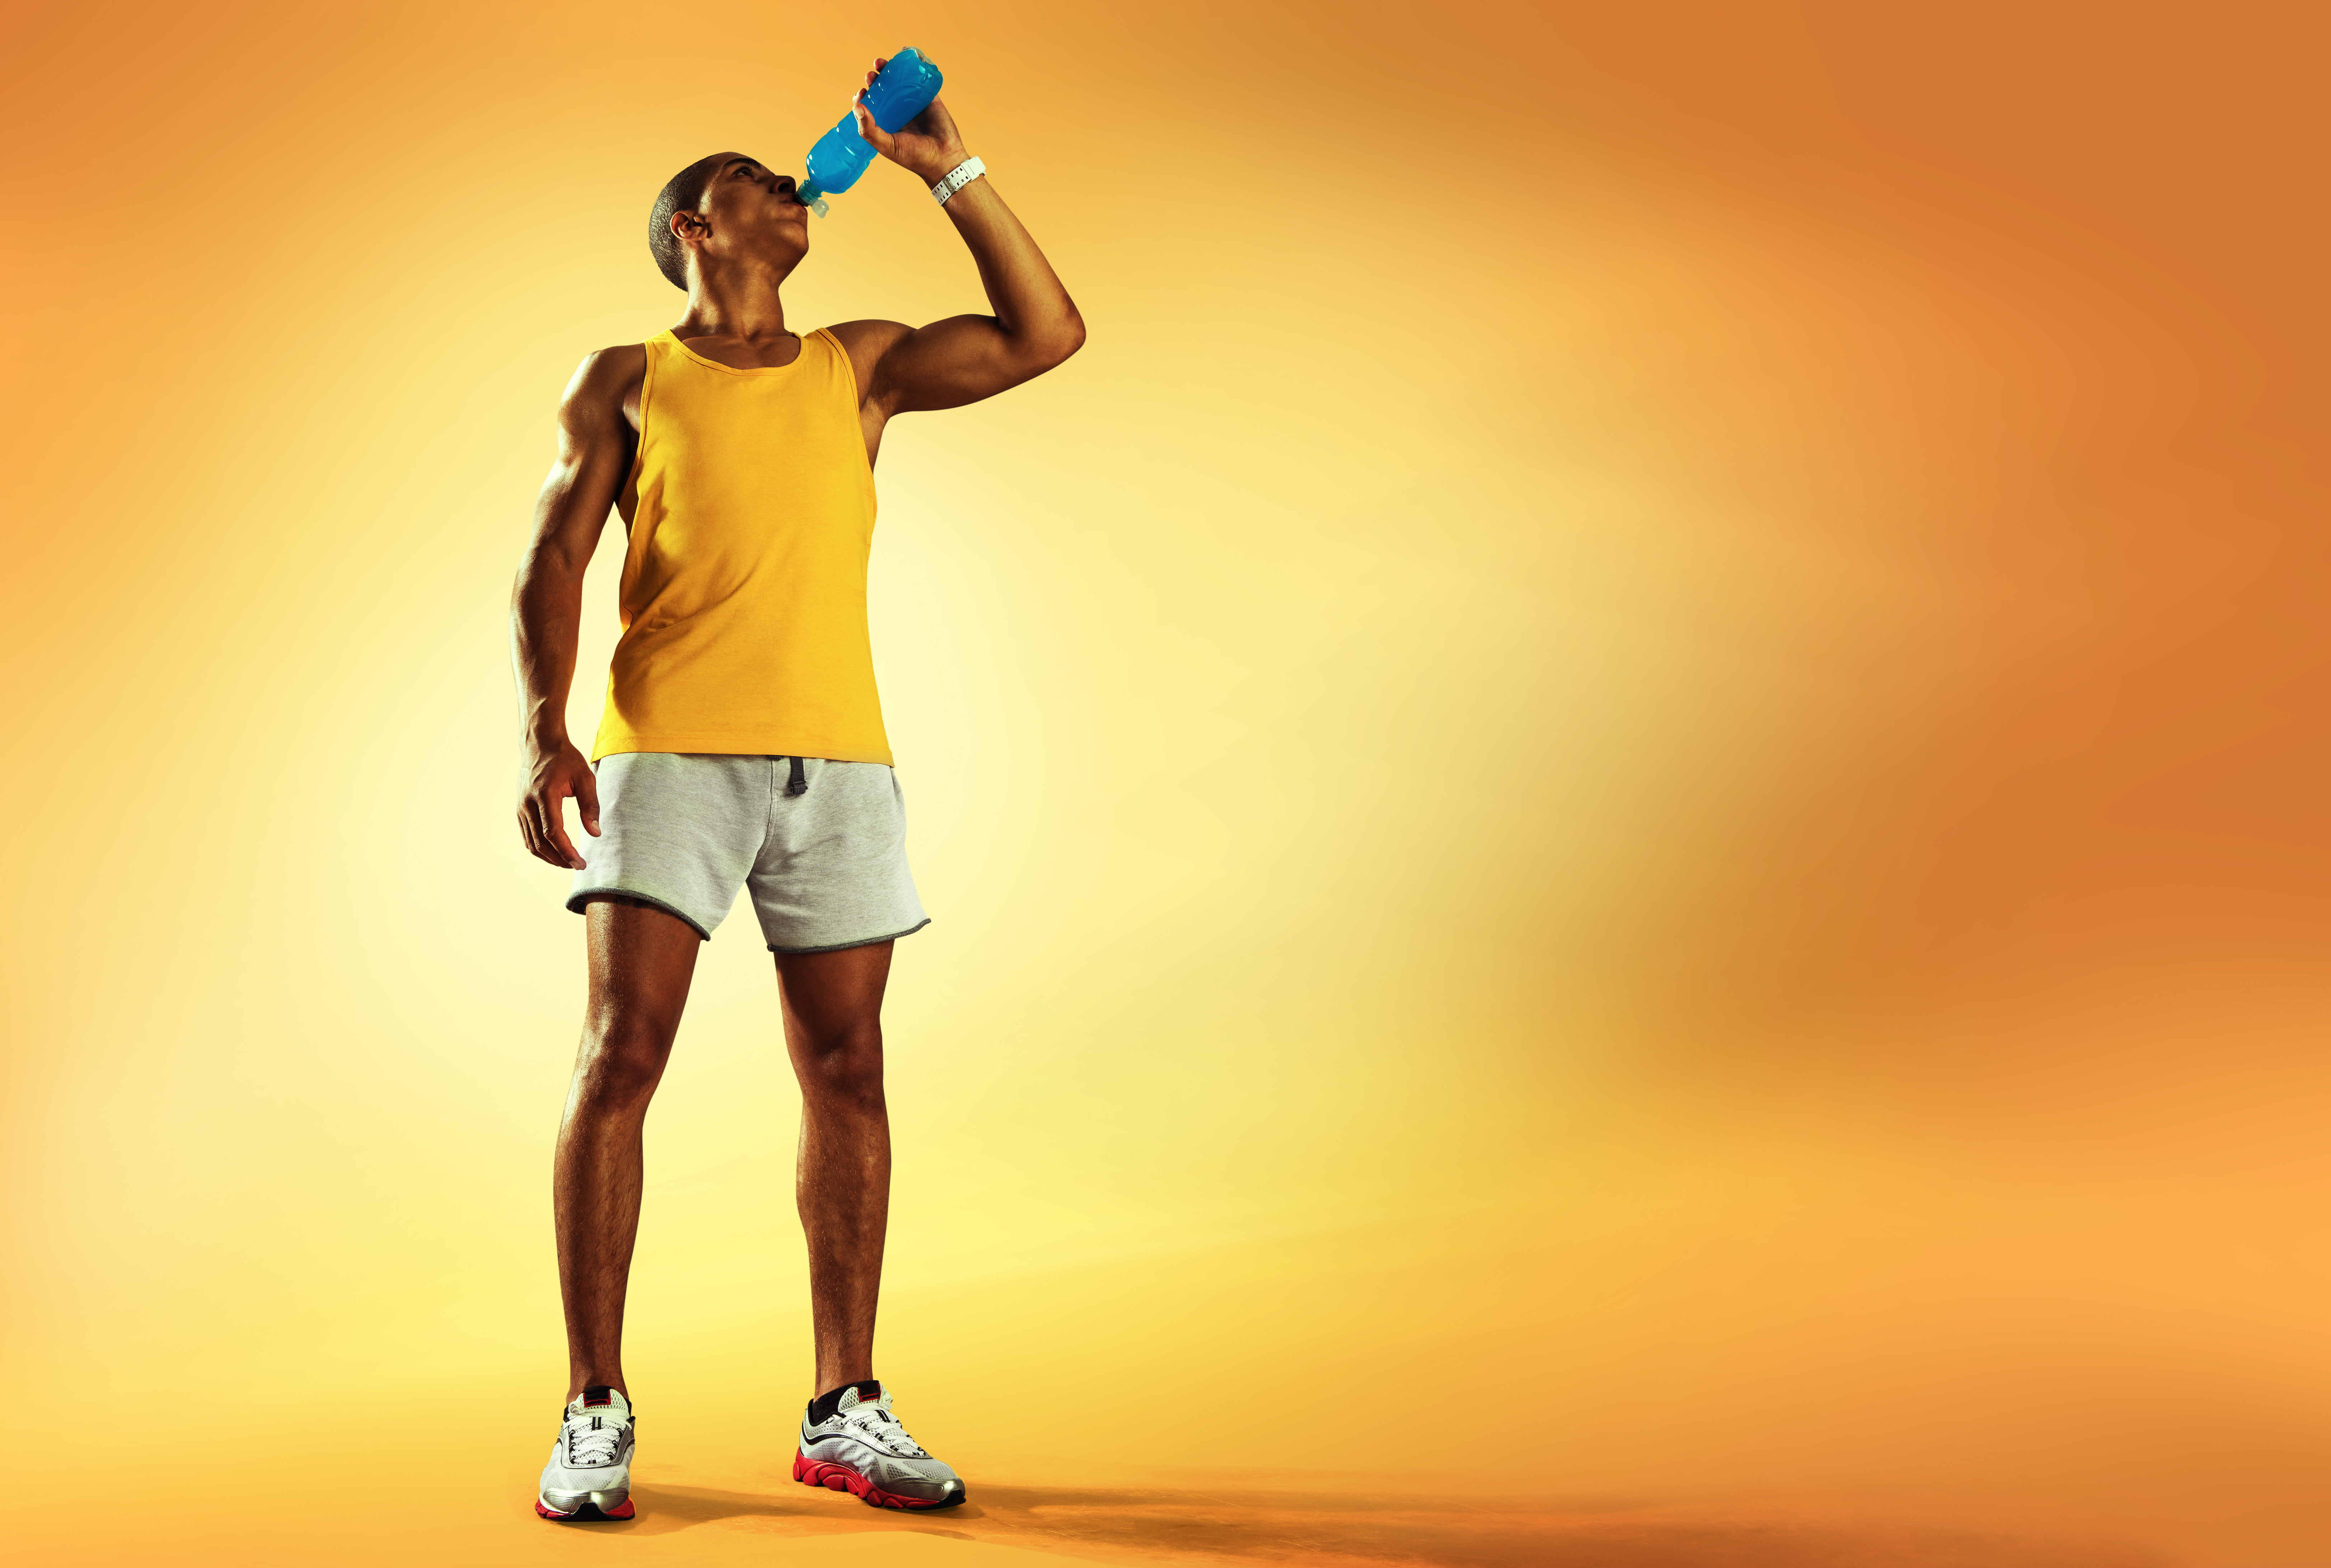 A man hydrating from a bottle on an orange background.